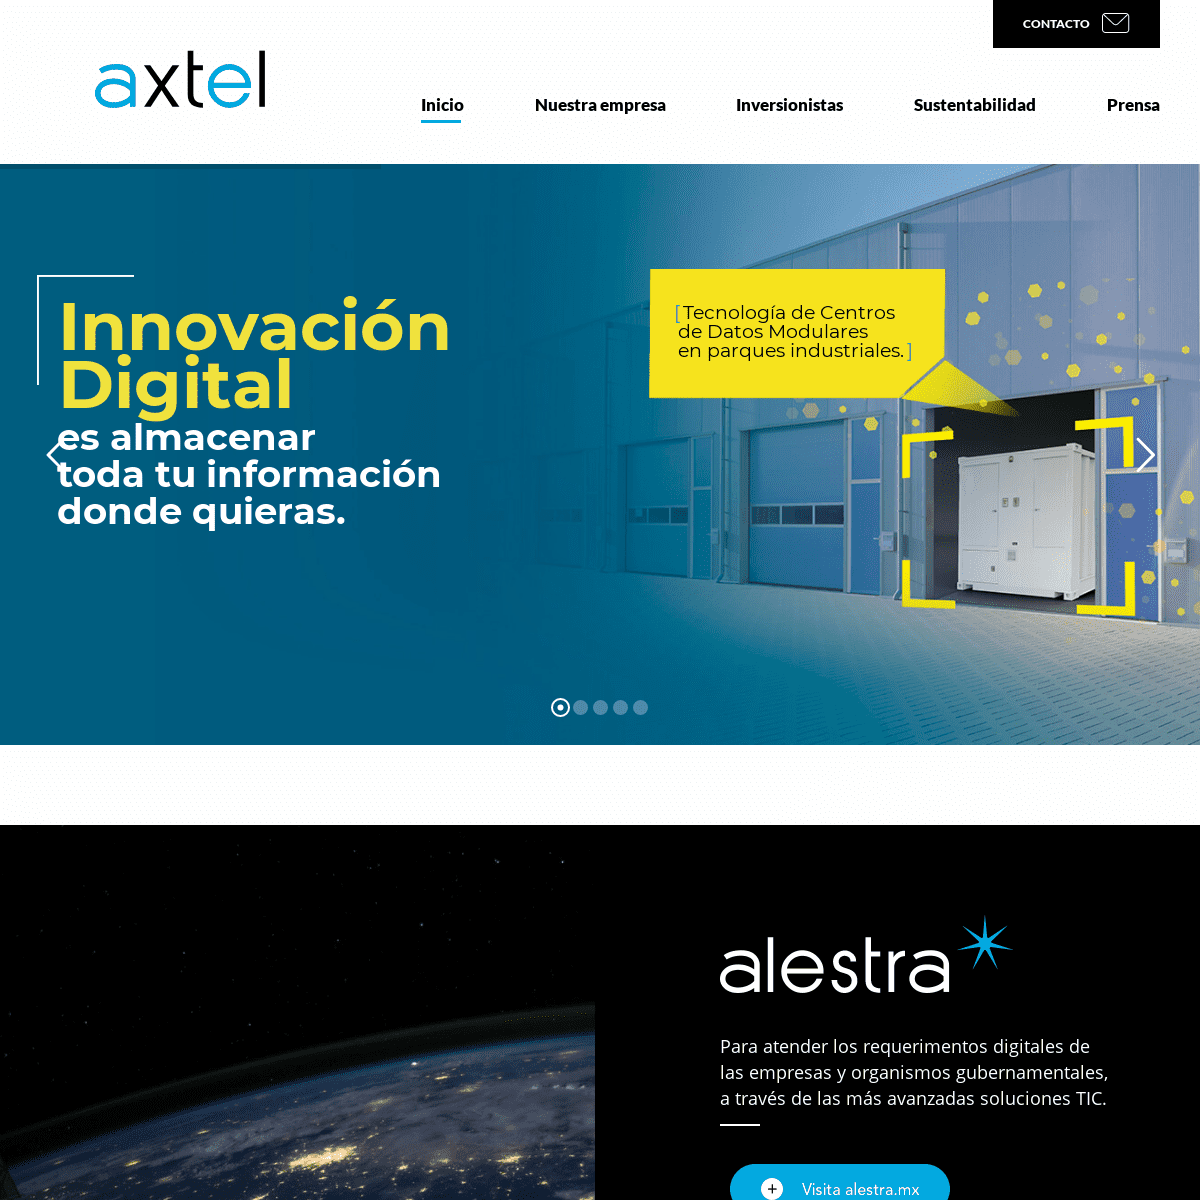 A complete backup of axtelcorp.mx